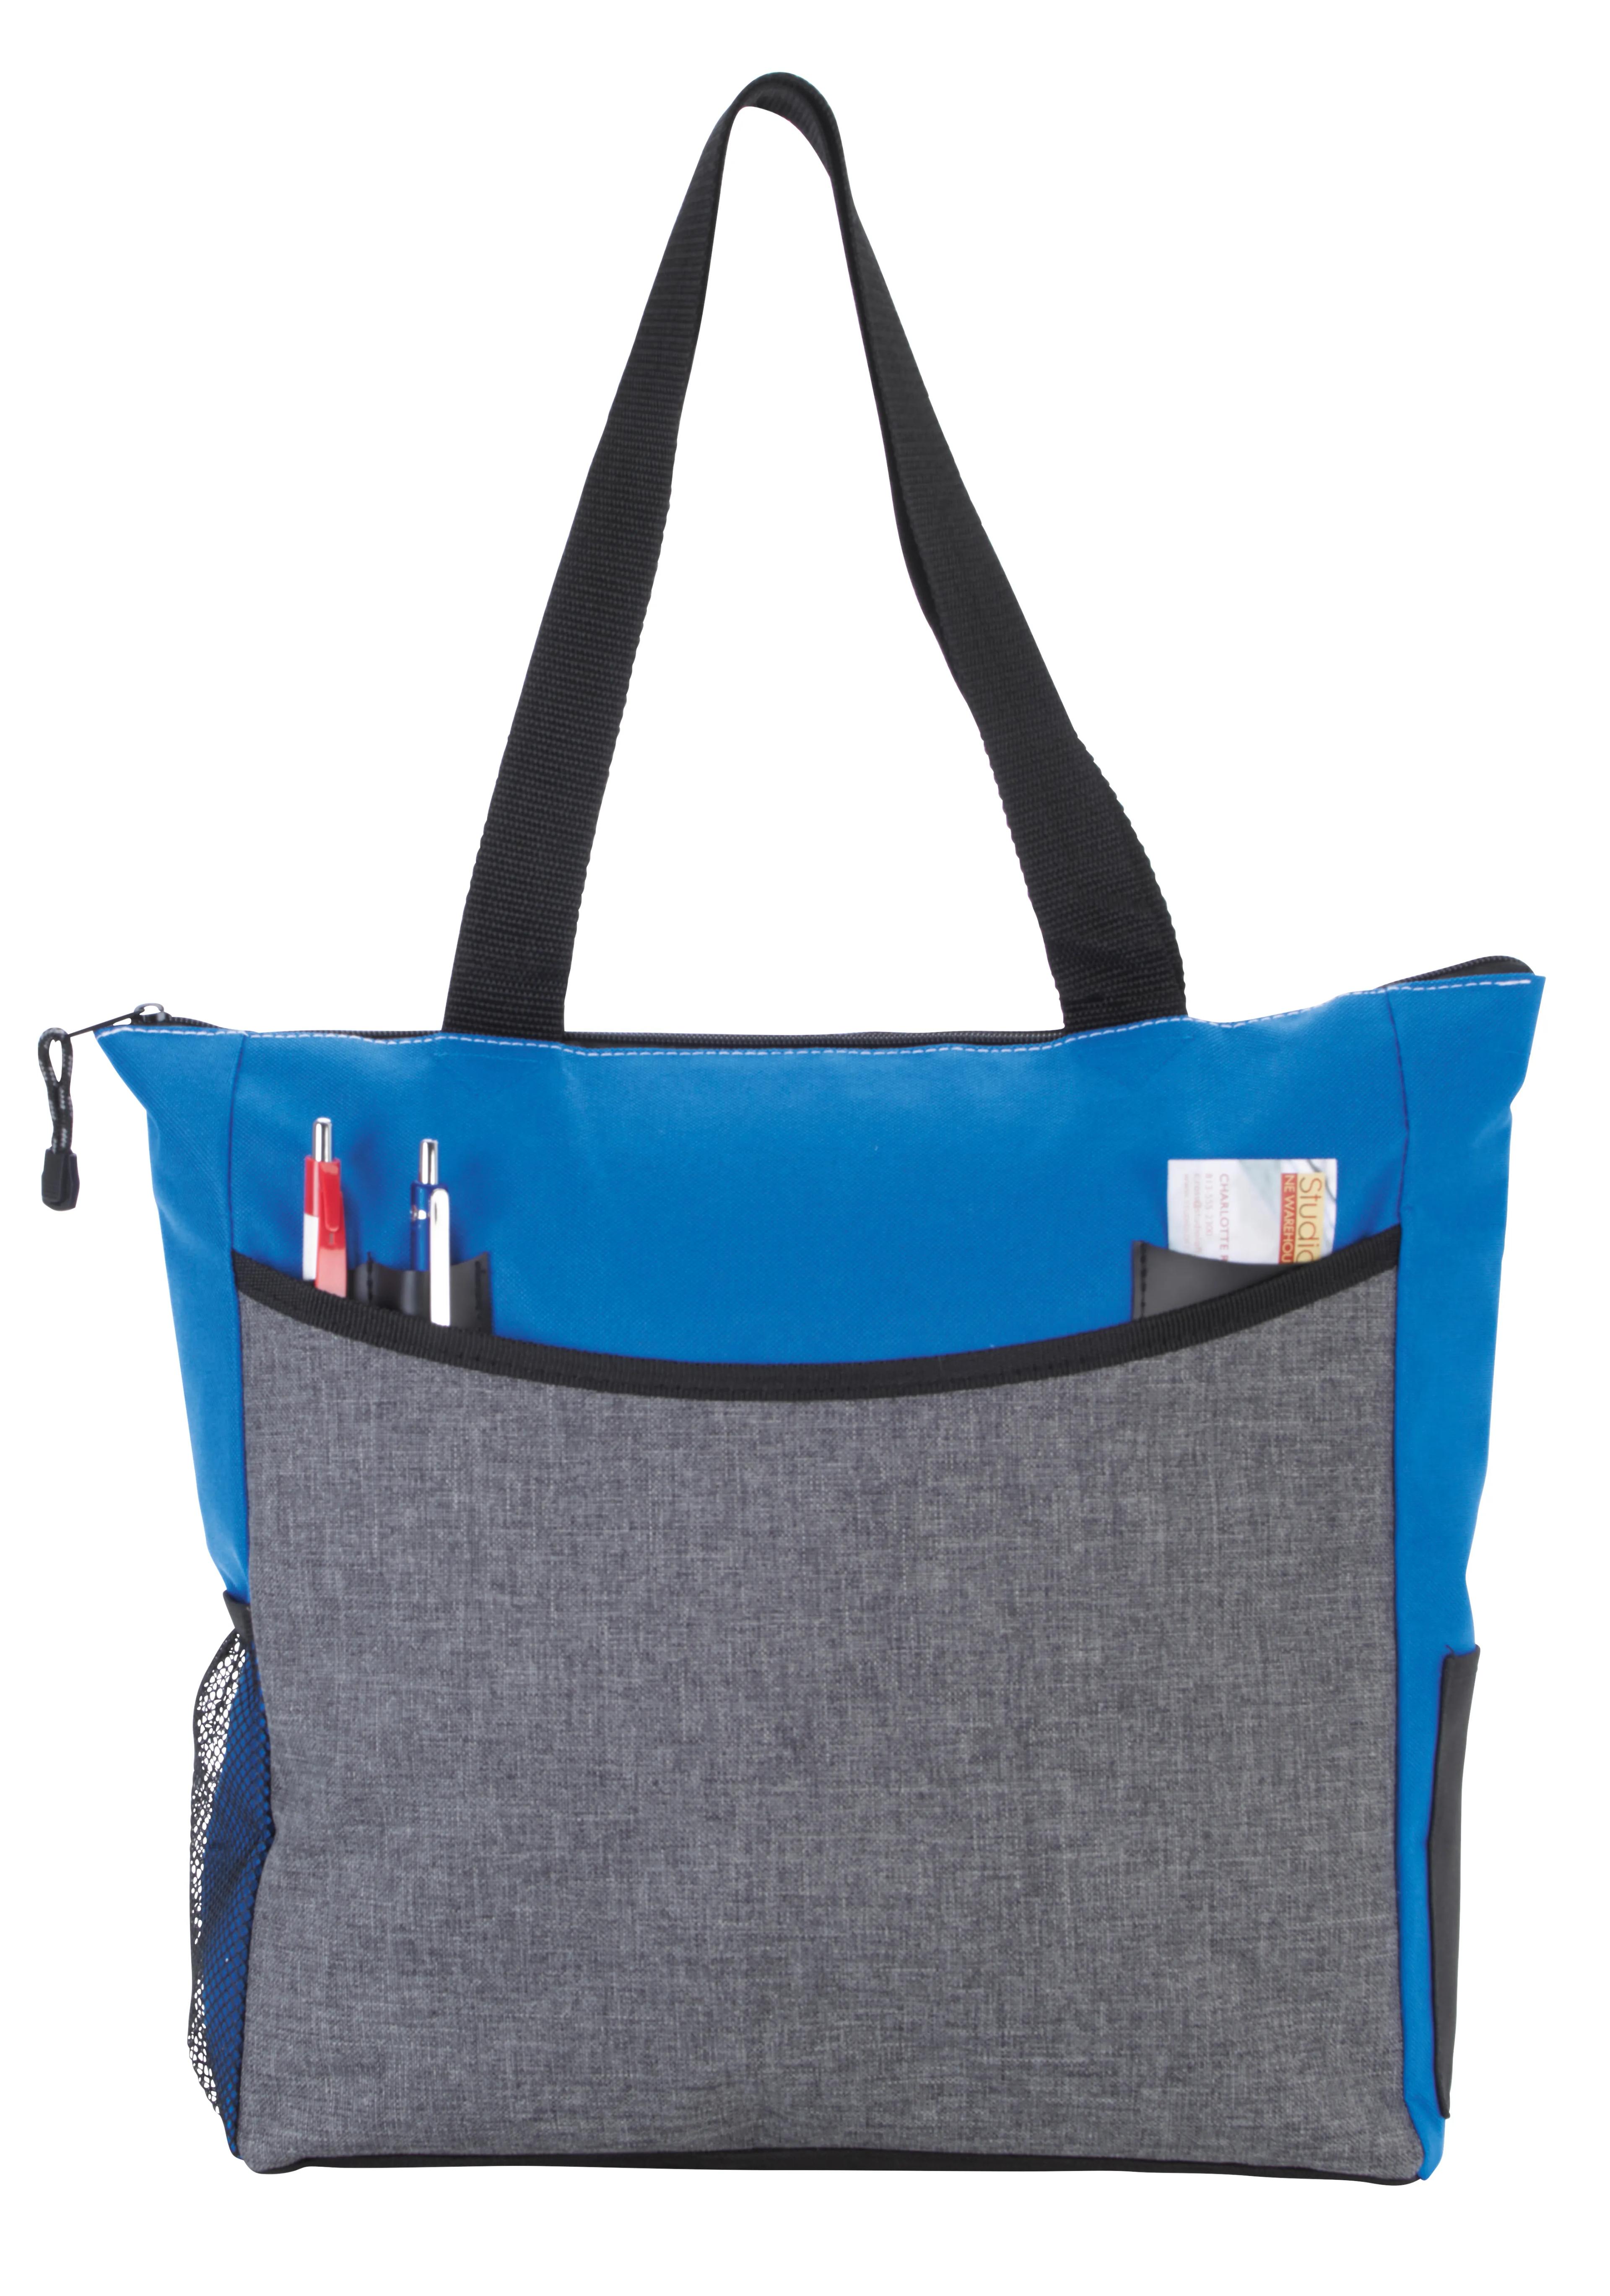 Two-Tone TranSport It Tote 21 of 29